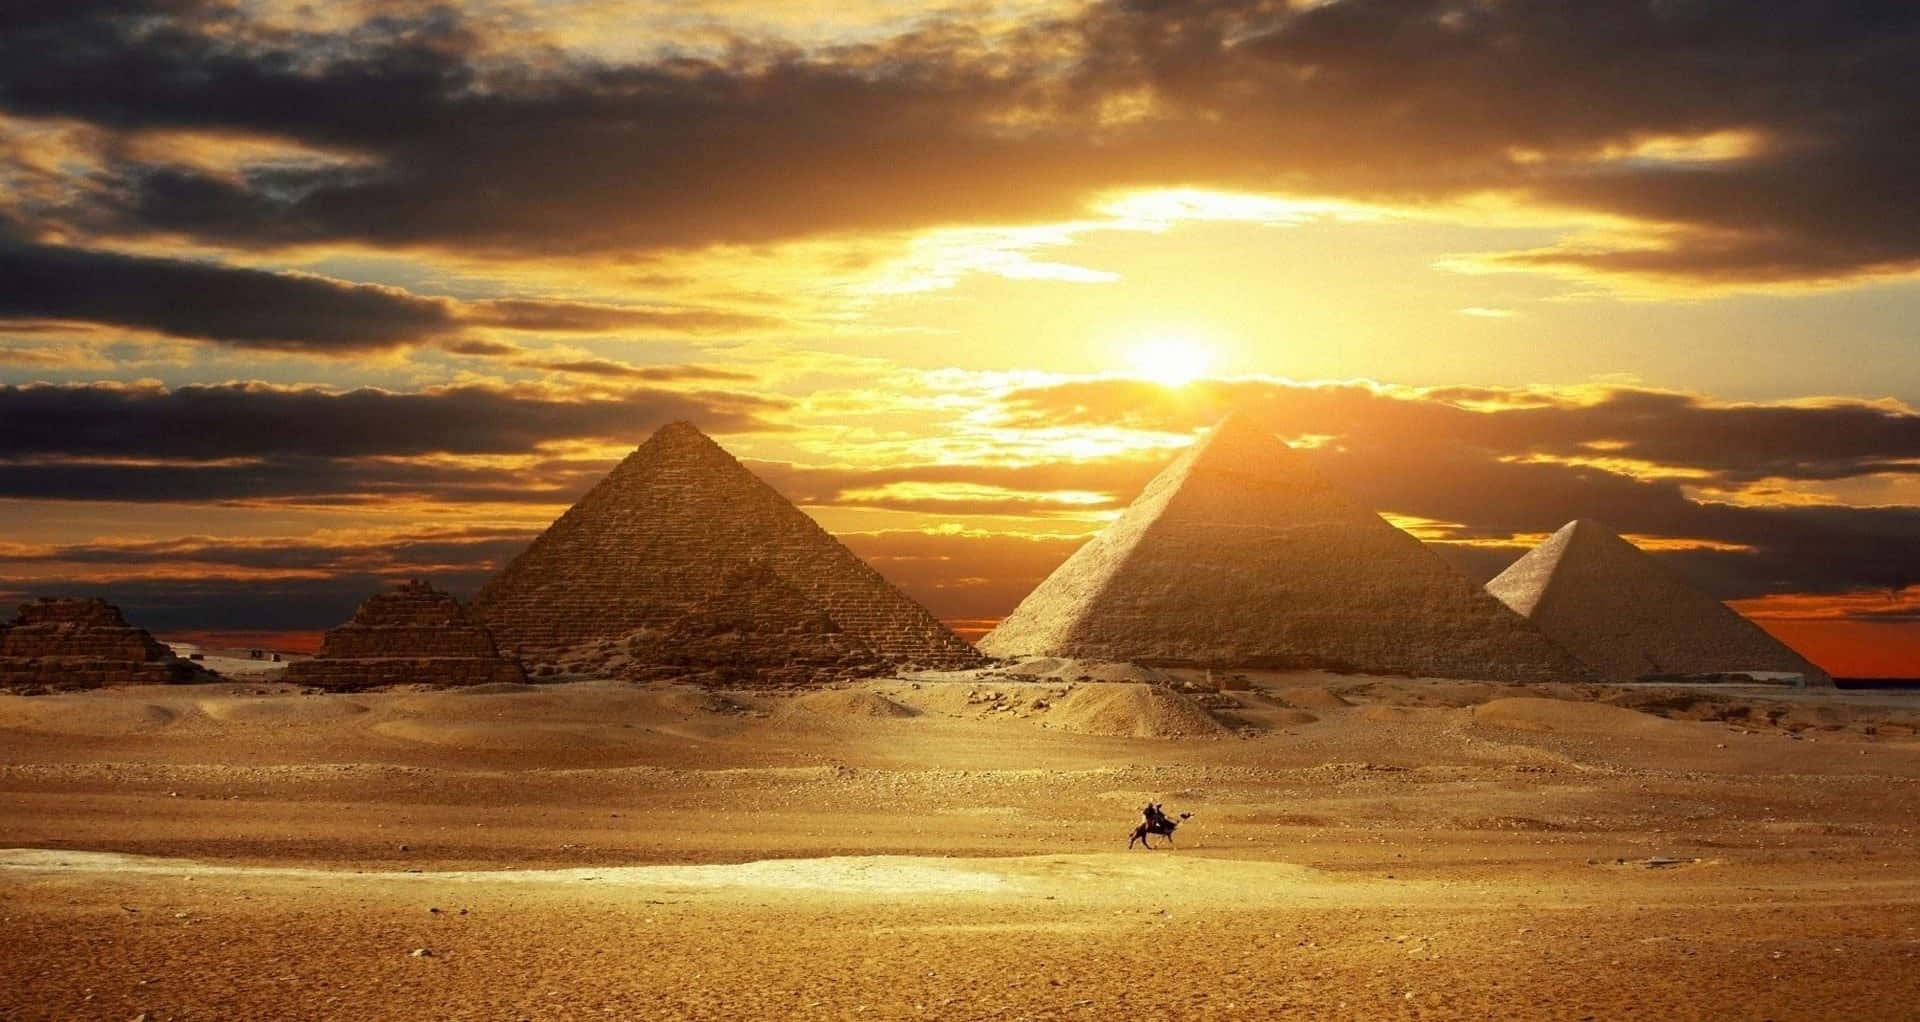 Breathtaking view of the Great Pyramids of Giza with the Sphinx in Egypt